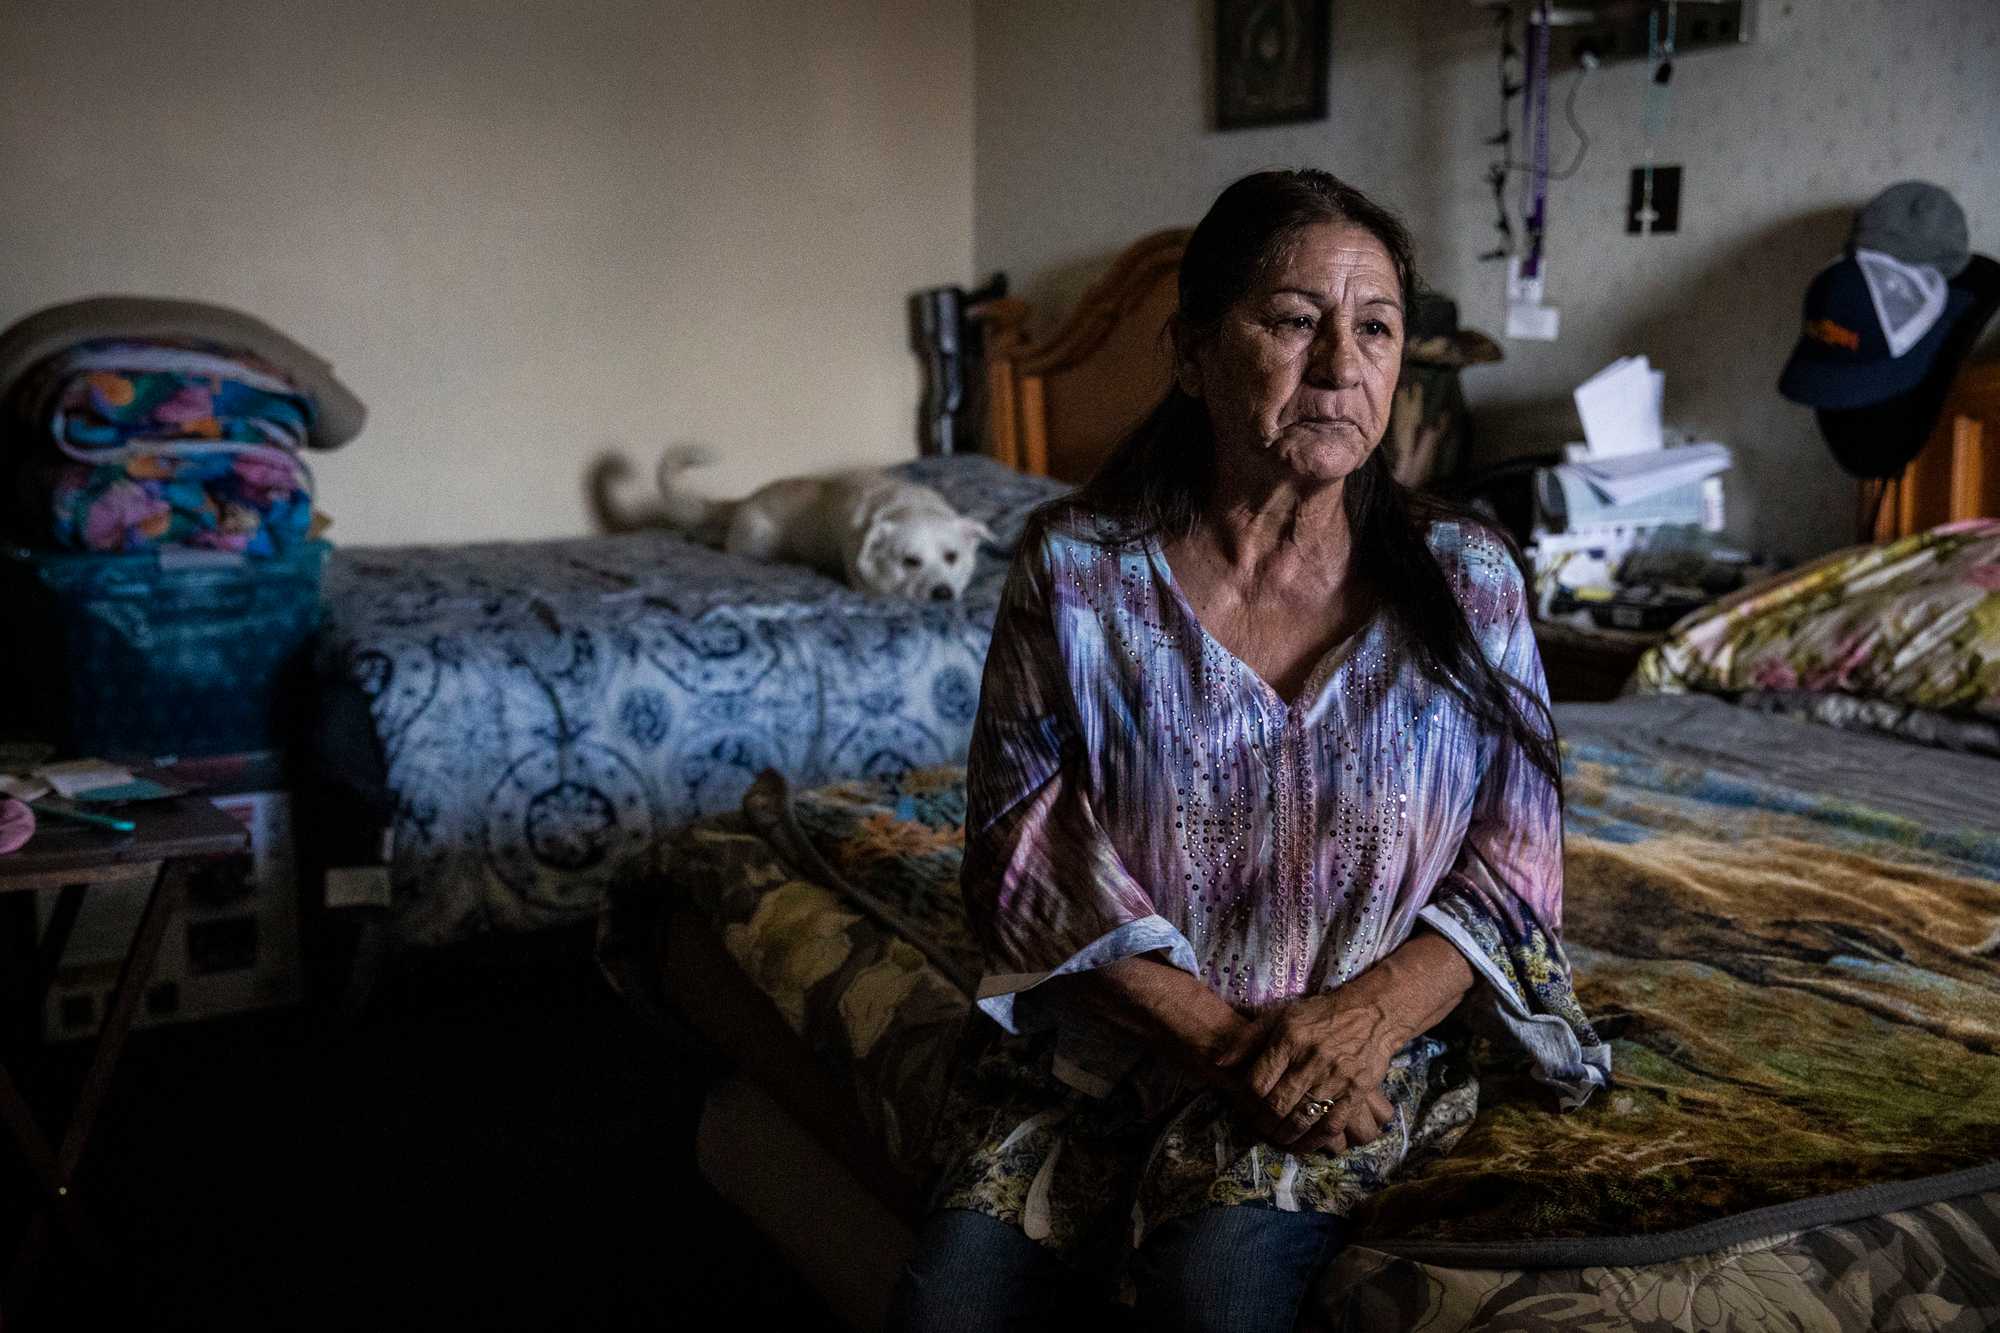 Anita Rivera in the motel room where she and her husband, Andrew Vigil, have been living with their dog, Polar Bear, since their home was destroyed by a wildfire.

